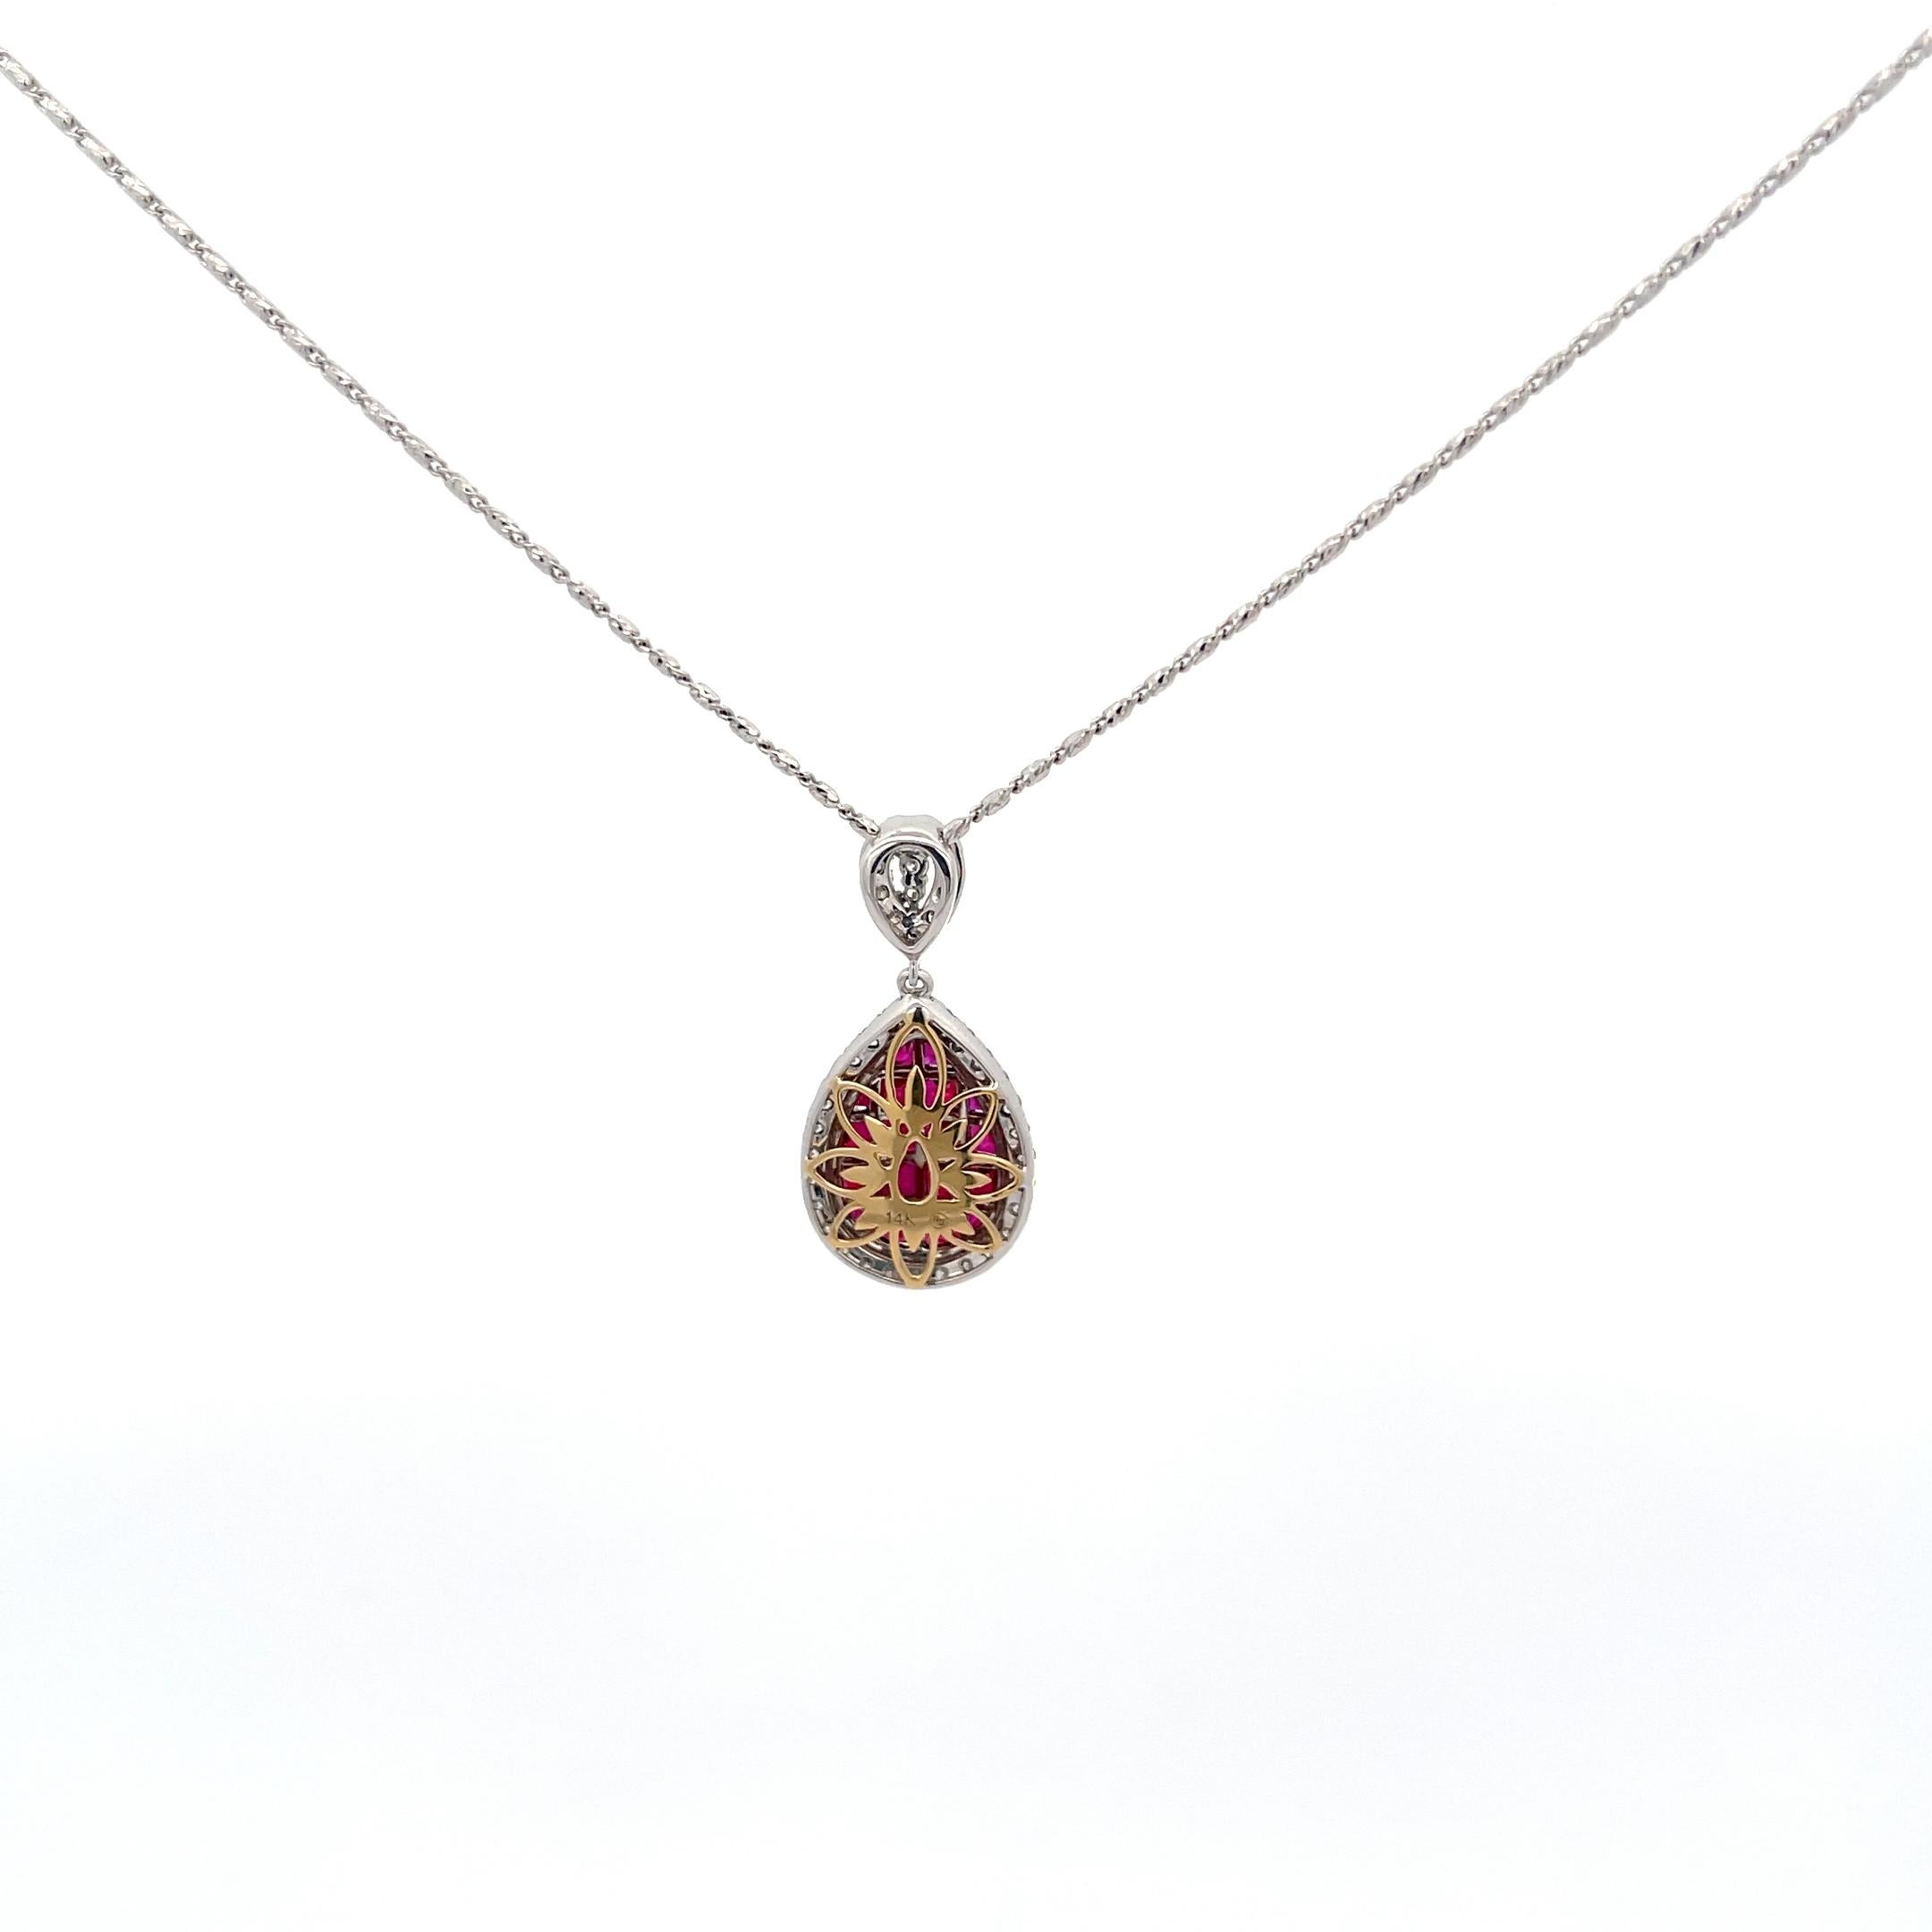 Illusion Ruby and Diamond Teardrop Pendant Necklace14k White Gold In Excellent Condition For Sale In Dallas, TX